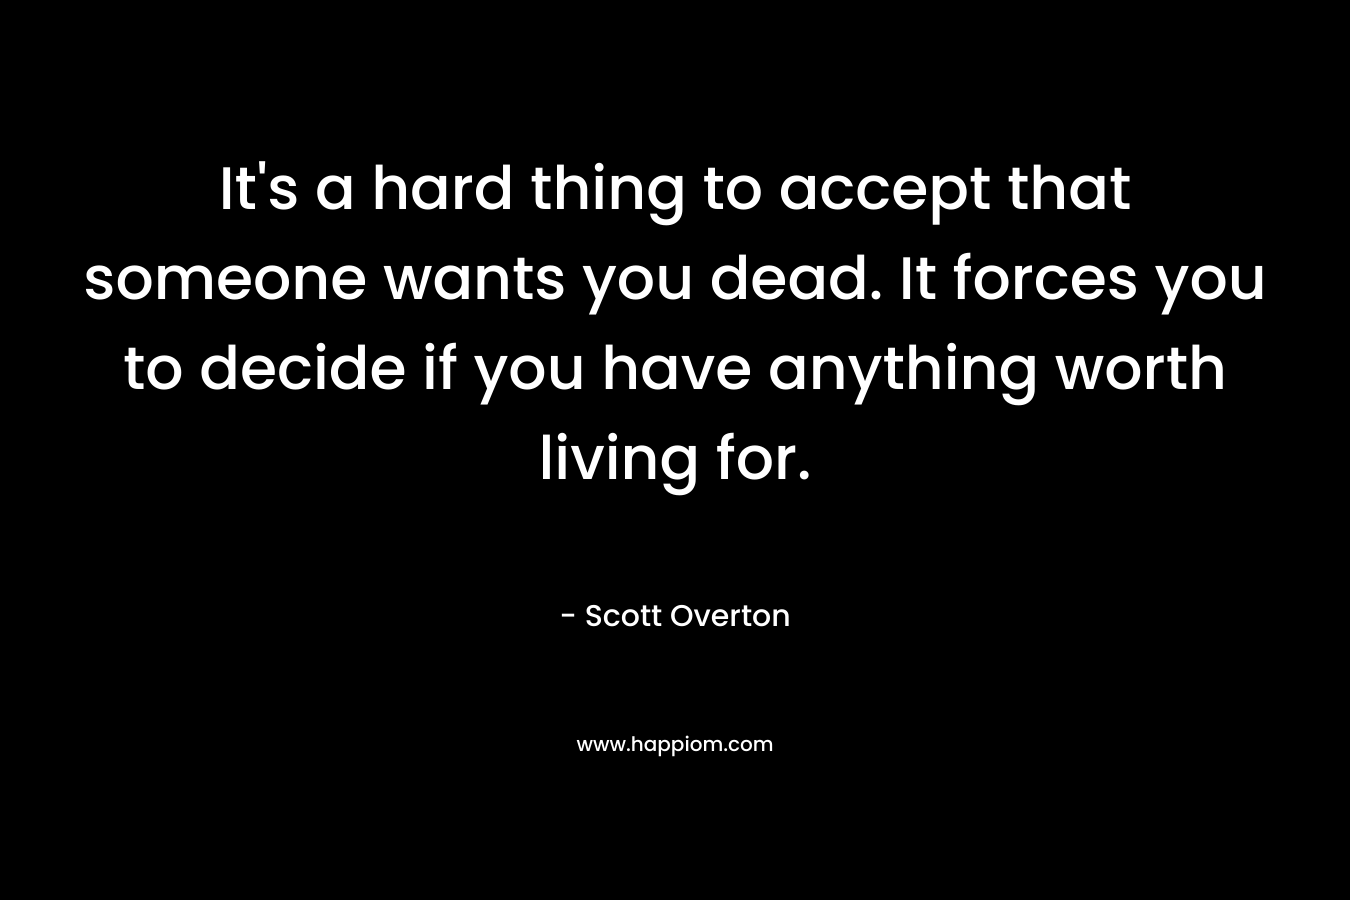 It’s a hard thing to accept that someone wants you dead. It forces you to decide if you have anything worth living for. – Scott Overton